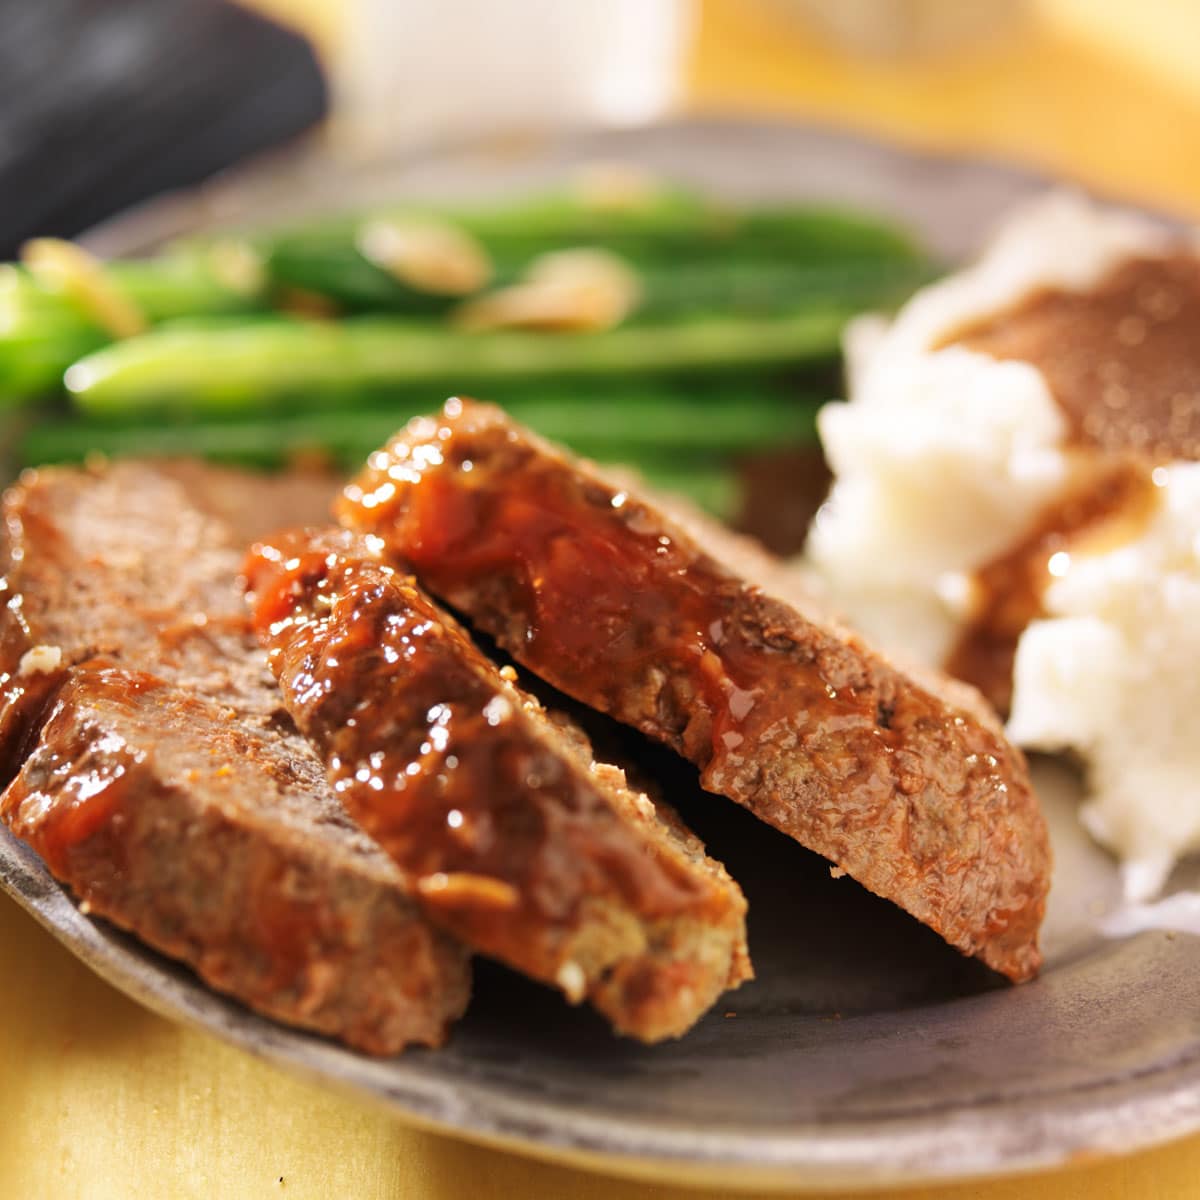 I'm sharing Brenda Gantt meatloaf recipe. It will make your taste buds tingle! Trust me, you don't want to miss out on this one.